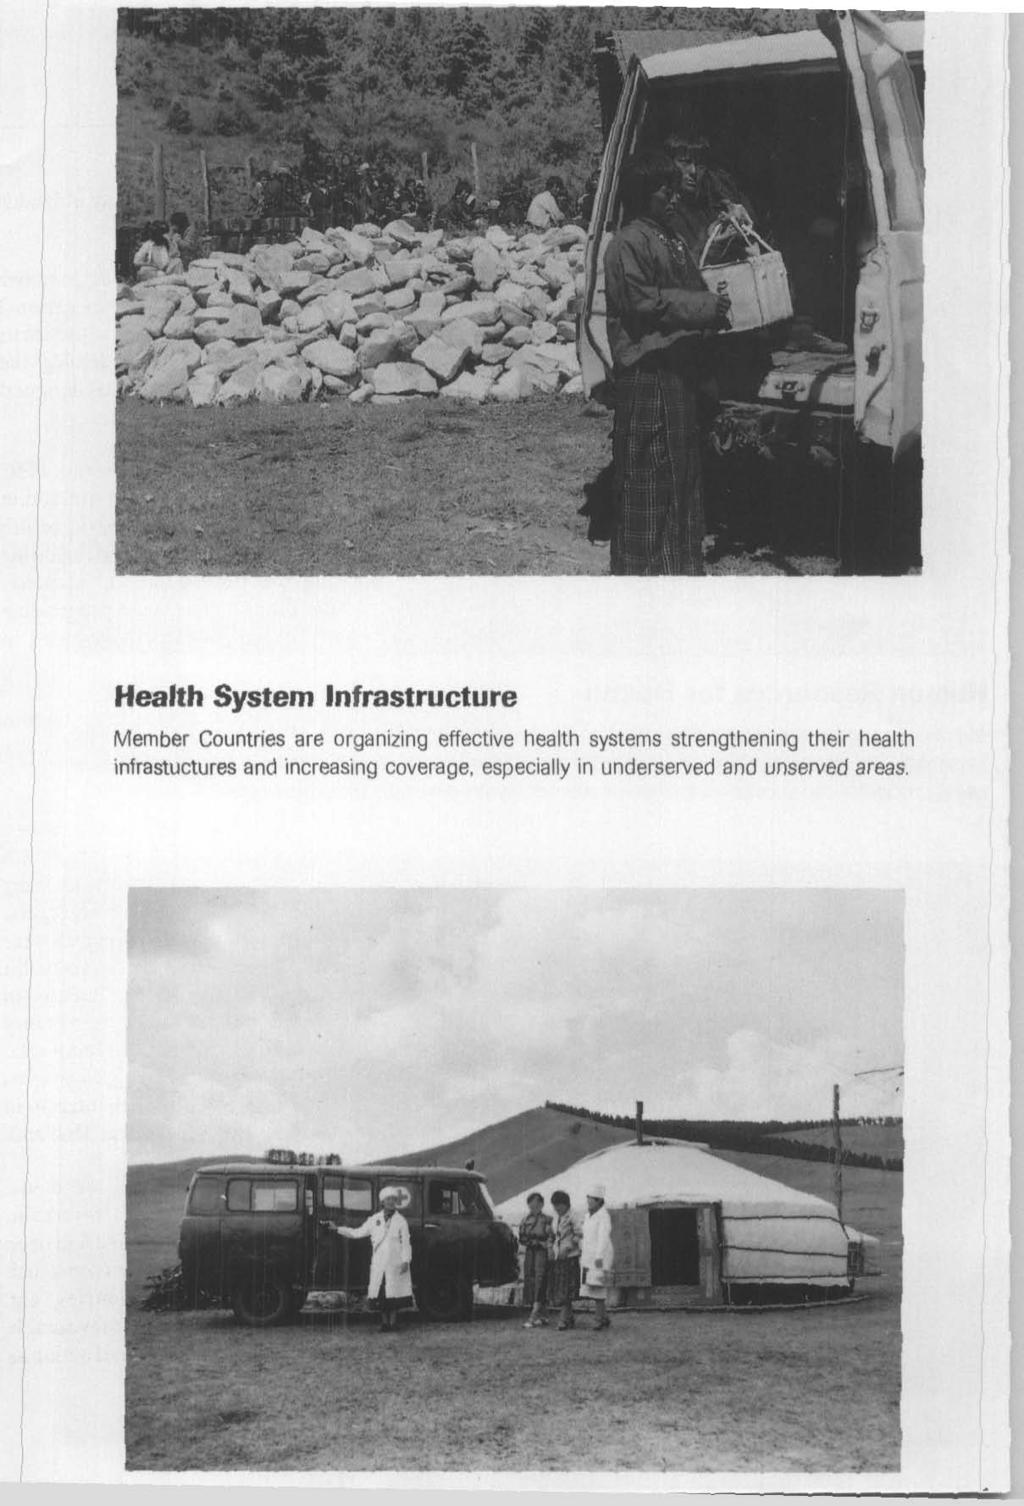 Health System Infrastructure Member Countries are organizing effective health systems